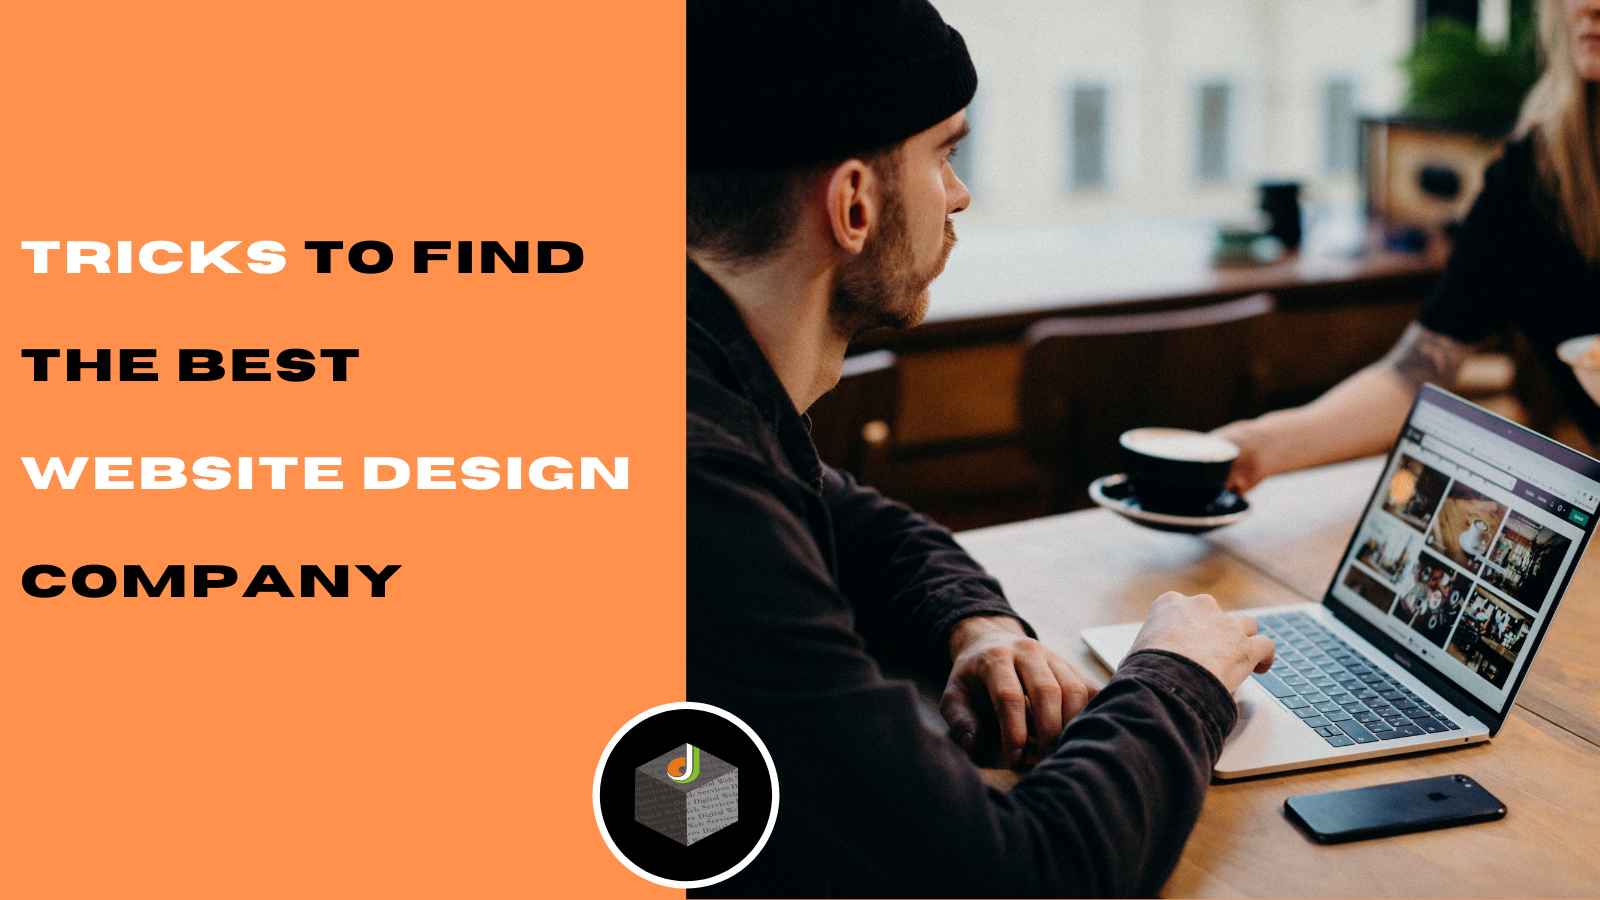 Tricks to Find the Best Website Design Company